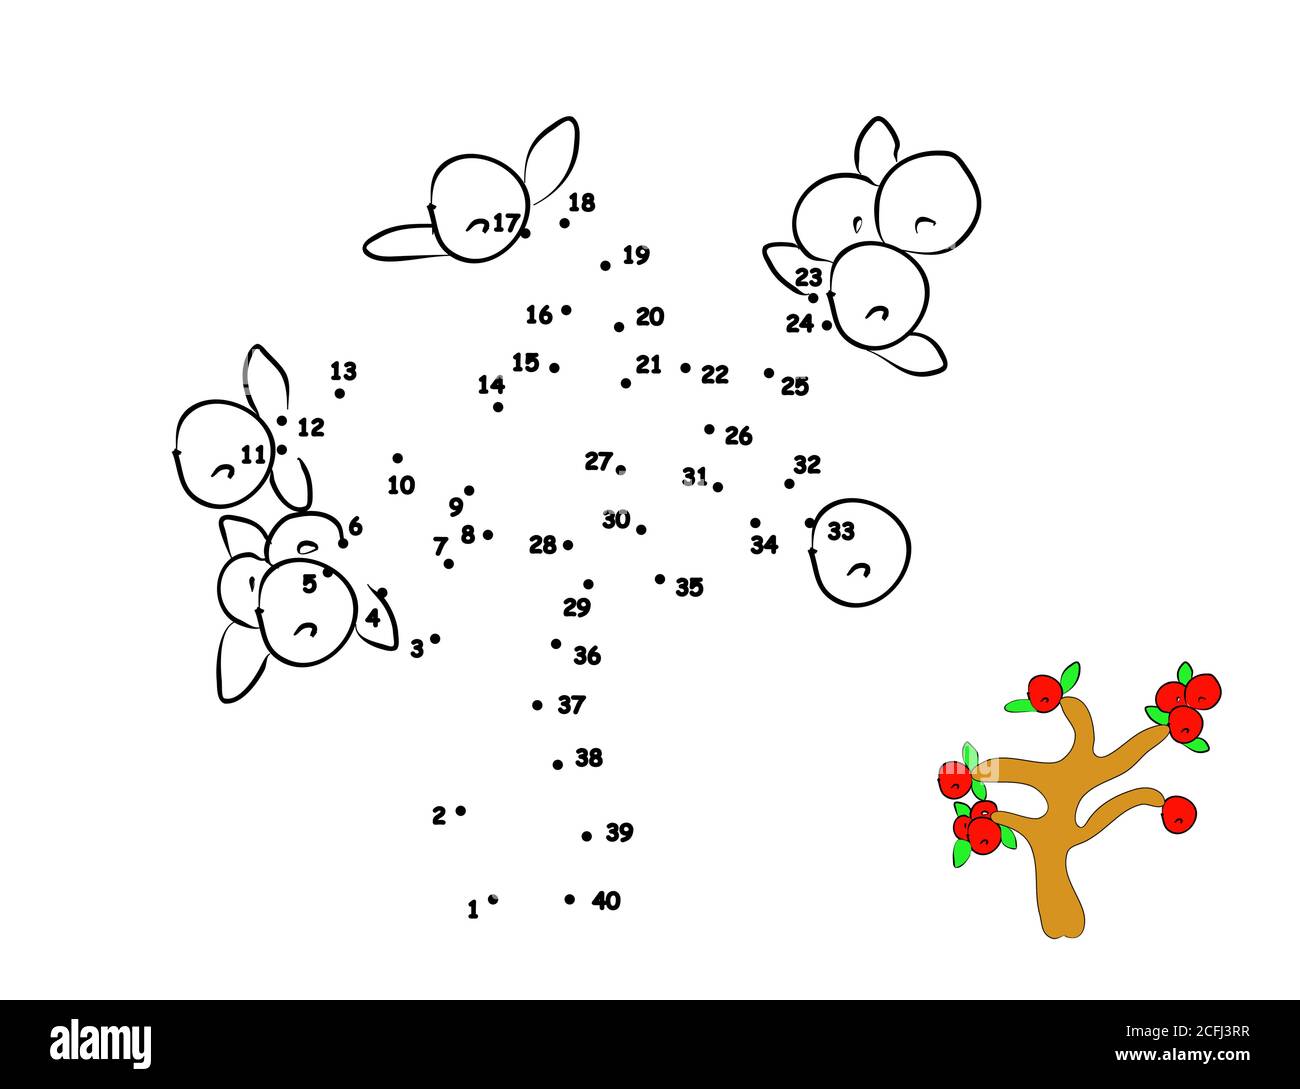 Fruit on tree. Dot to dot game education. Hand draw cute illustration, coloring vector Stock Vector